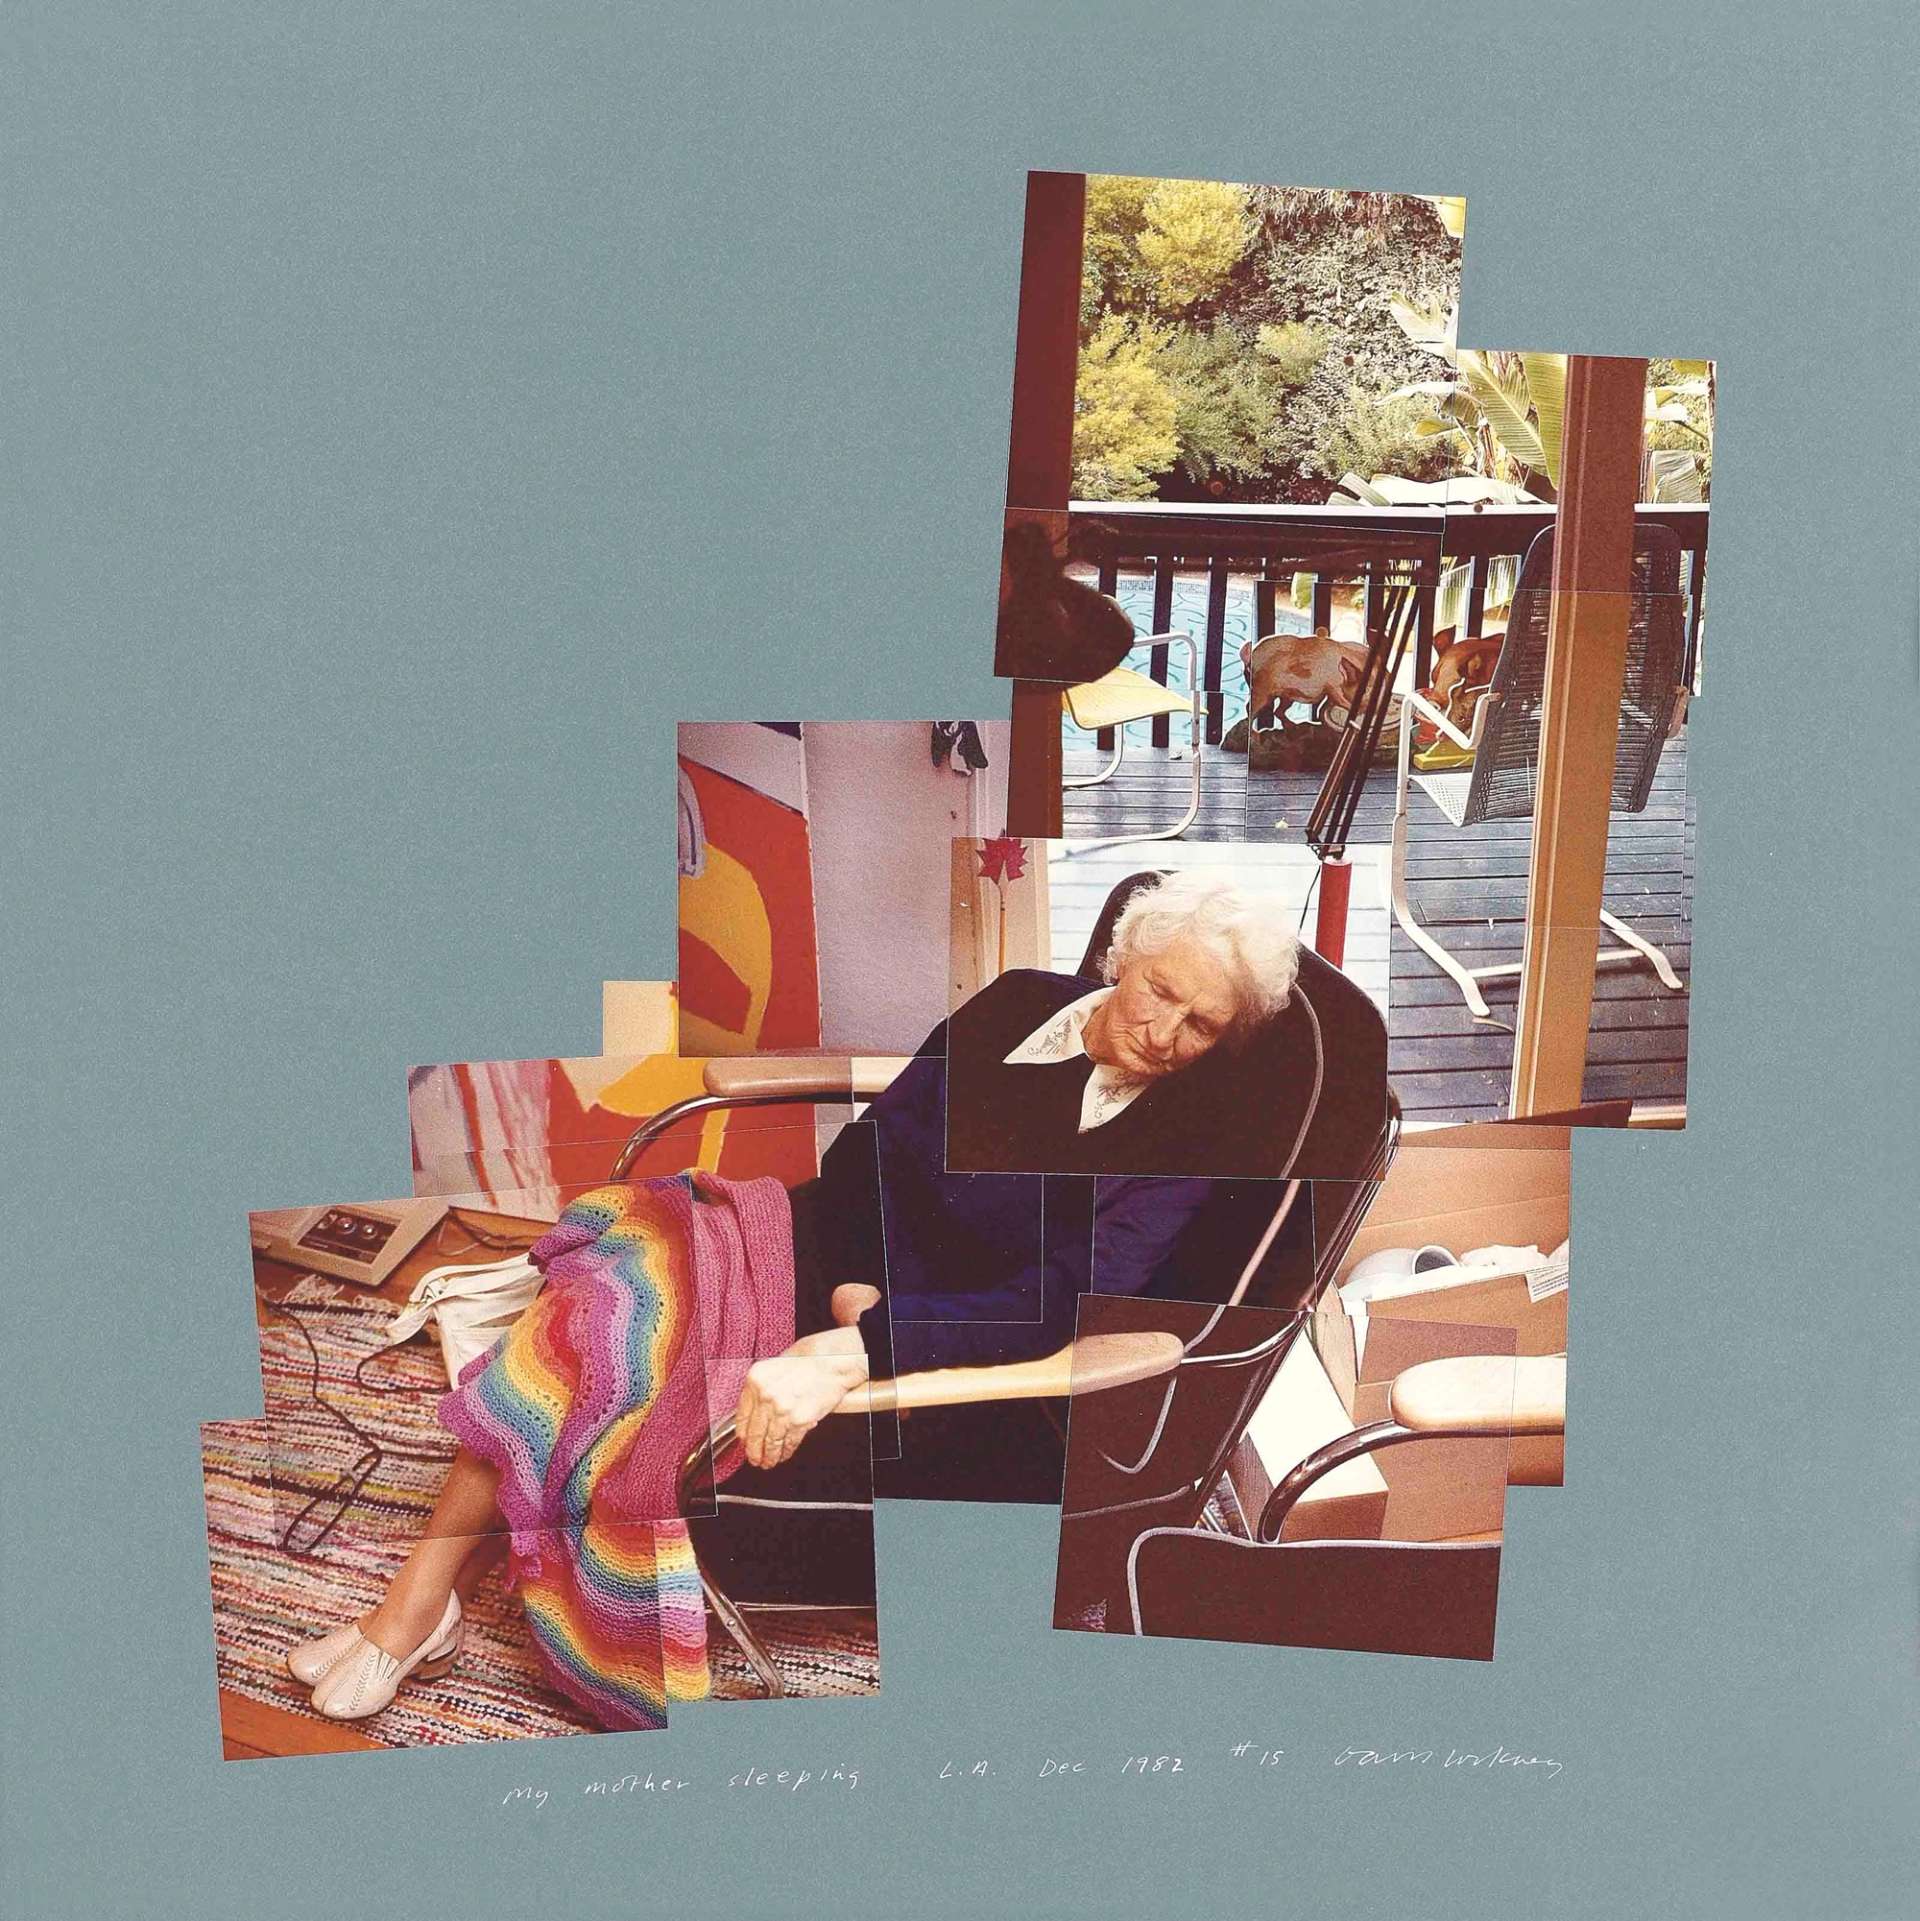 A fragmented portrait of artist David Hockney's mother, sleeping and reclining in a chair, wearing a colourful blanket.